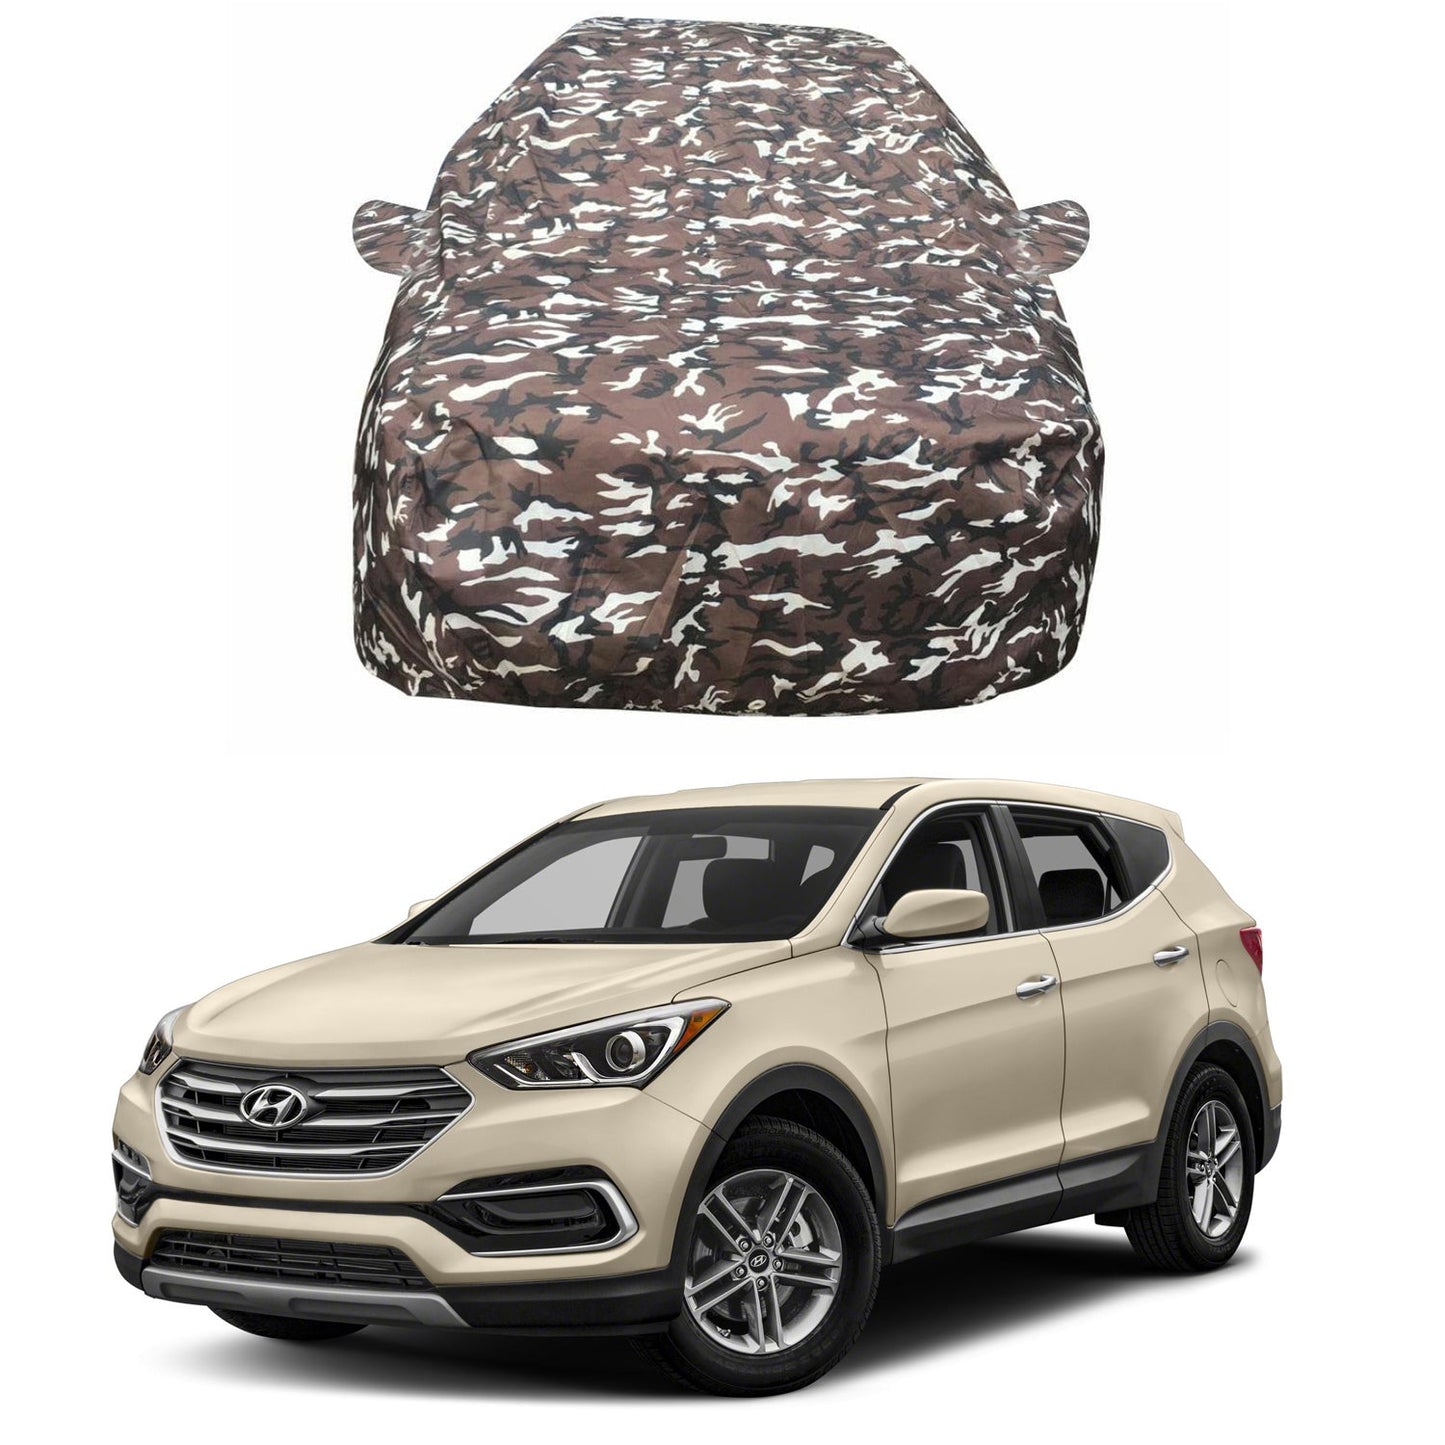 Oshotto Ranger Design Made of 100% Waterproof Fabric Multicolor Car Body Cover with Mirror Pockets For Hyundai Santa Fe